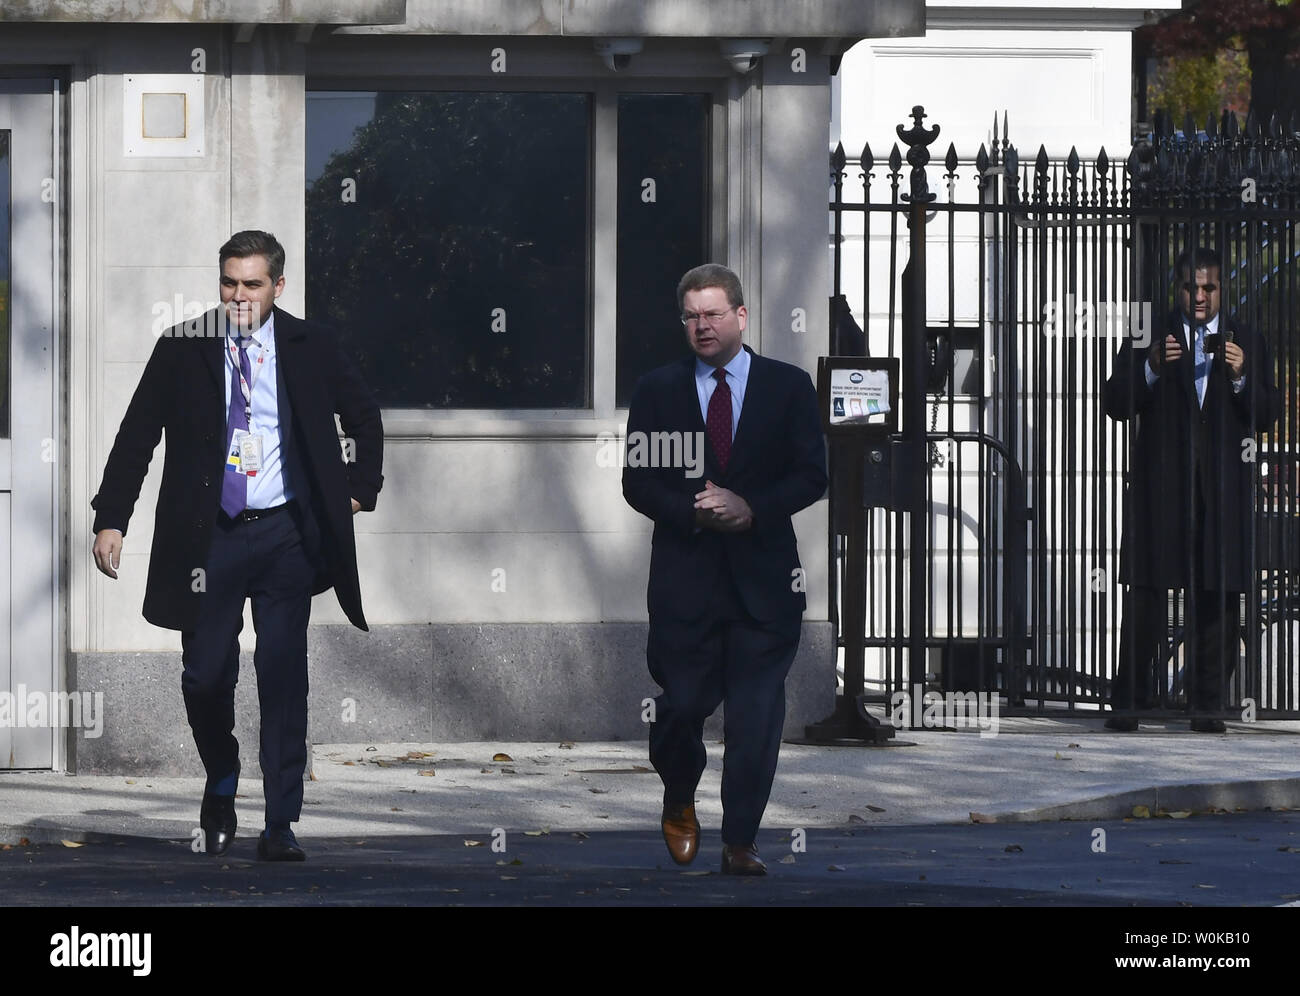 CNN reporter Jim Acosta (L) enters the White House grounds after having his White House press pass reactivated following an decision requiring the White House to immediately return Acosta's press pass by U.S. District Judge Timothy Kelly on November 16, 2018 in Washington, D.C.  CNN's Acosta's press pass was revoked following a recent President Donald Trump press conference.  Photo by Pat Benic/UPI Stock Photo